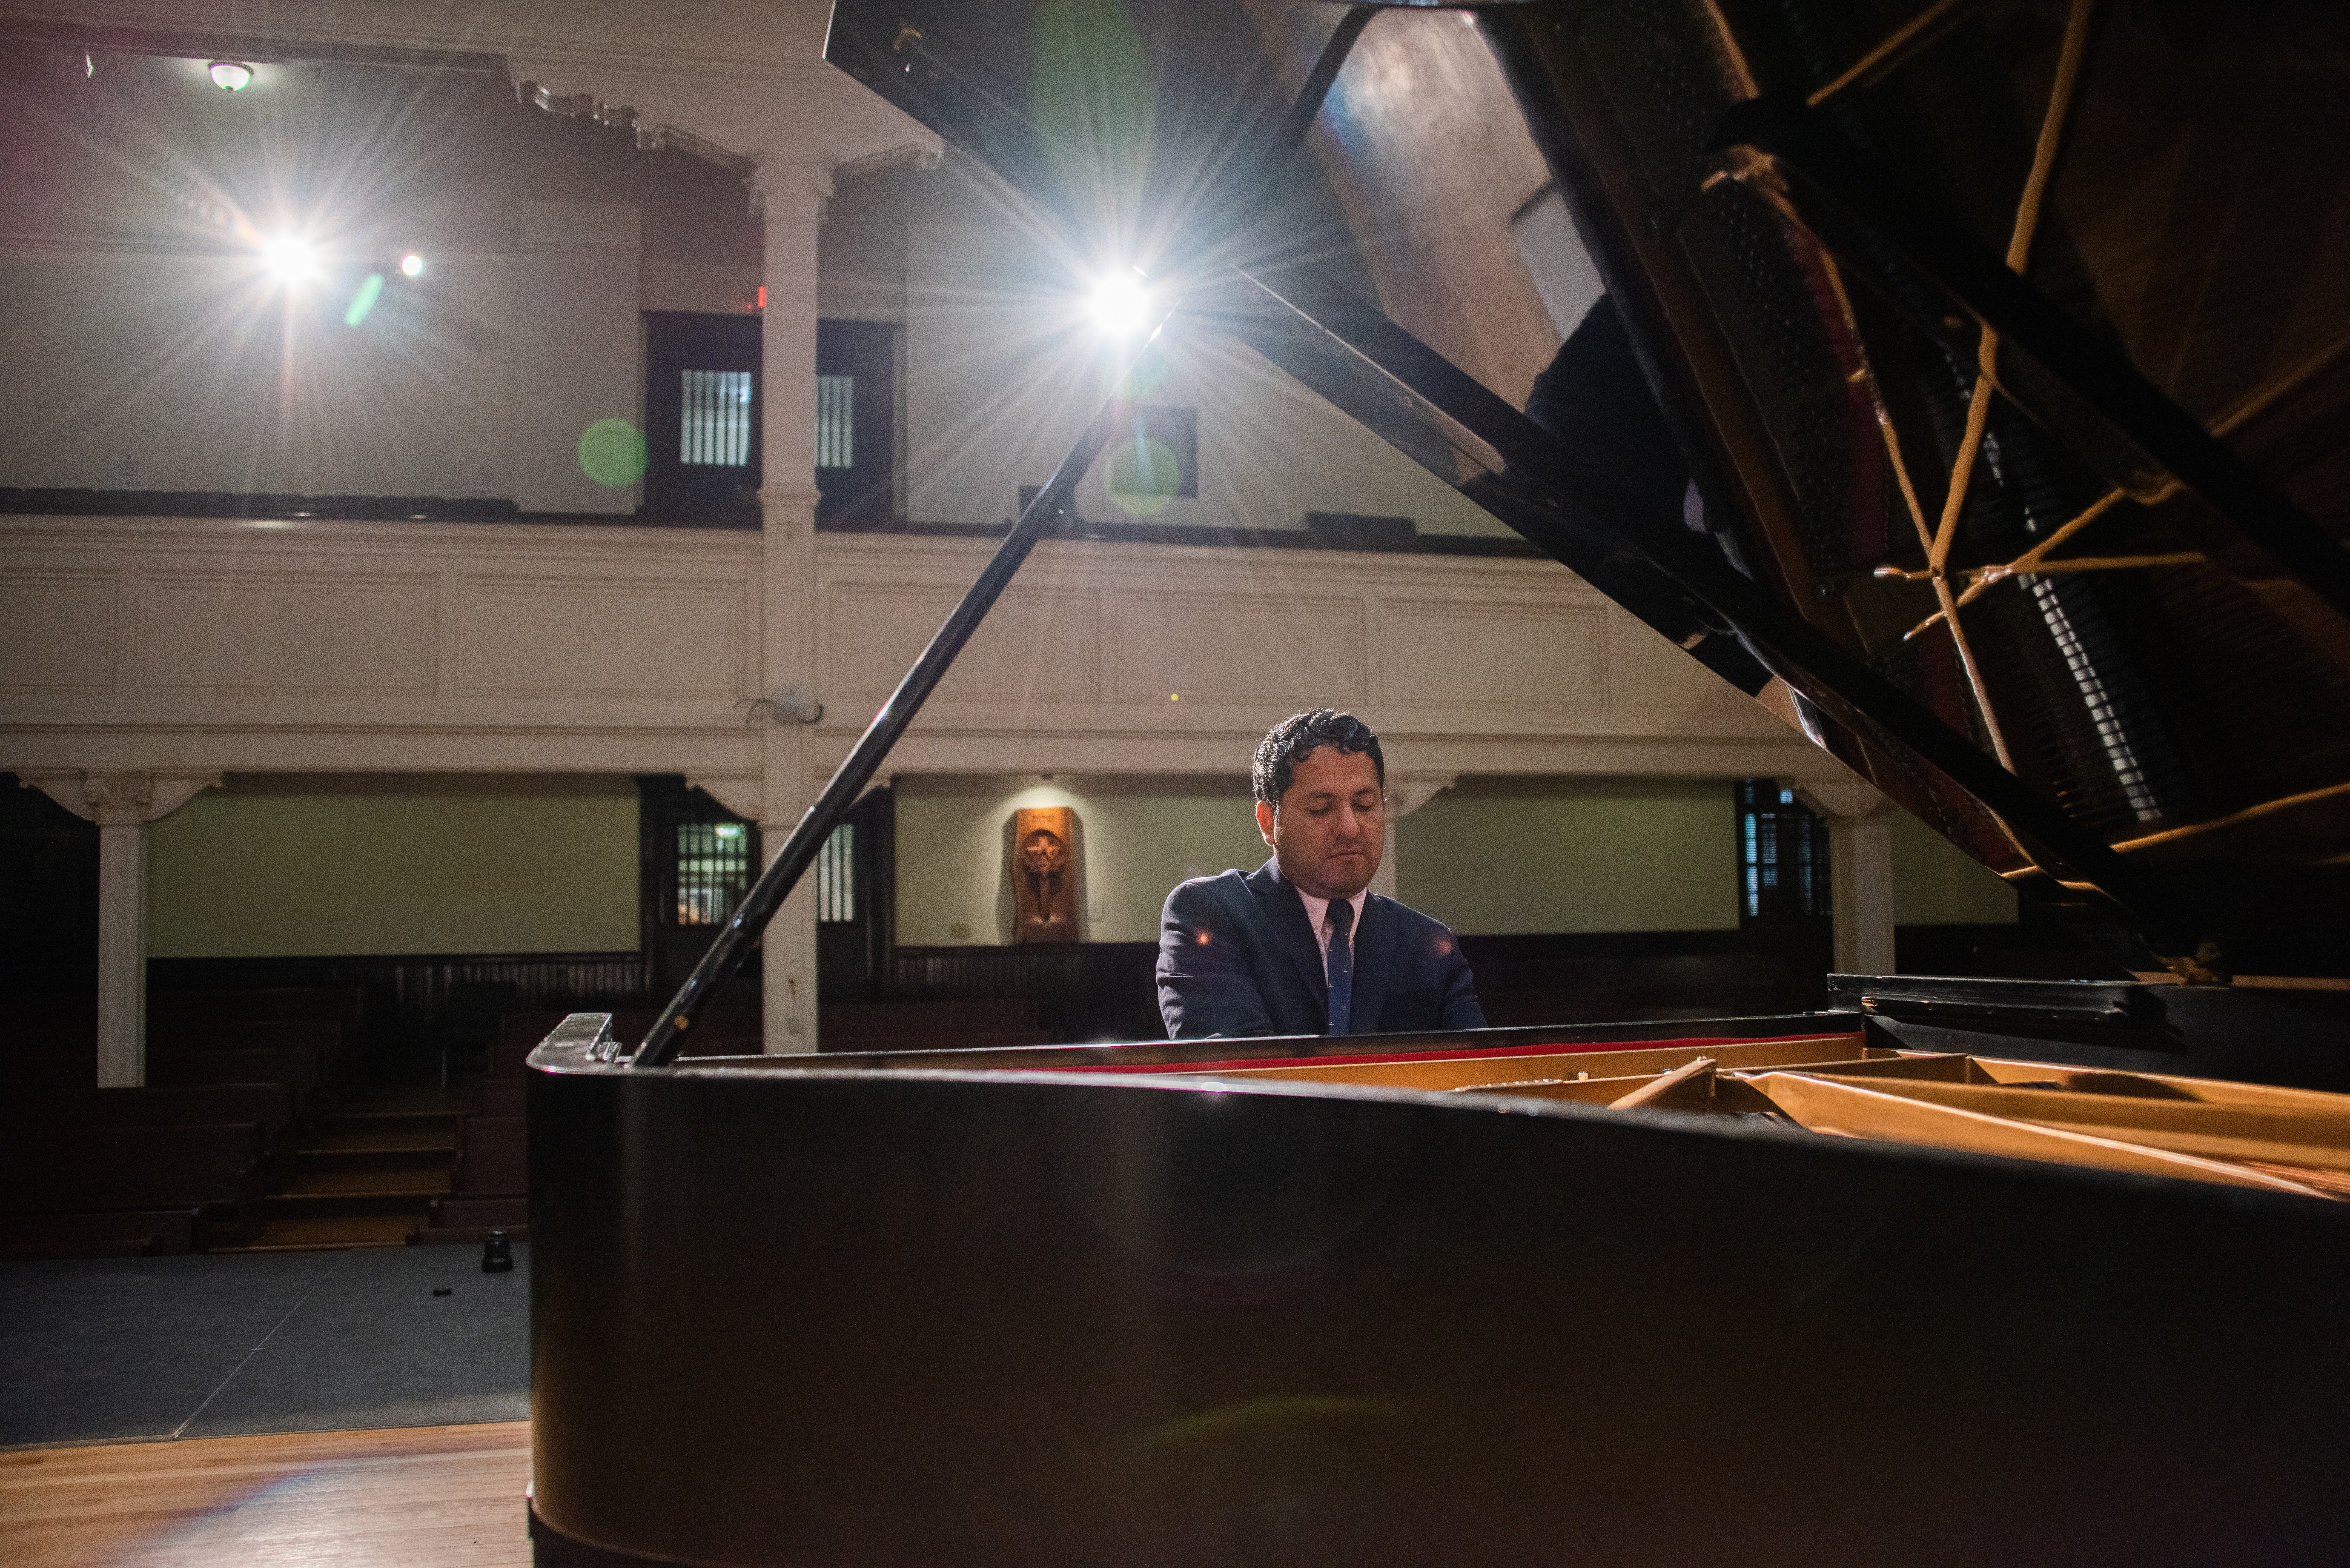 Washington Garcia, dean of Stetson University's School of Music, is a board member of the Orlando Philharmonic Orchestra and started an apprentice-style program with Opera Orlando as part of his community outreach. (Courtesy Washington Garcia)